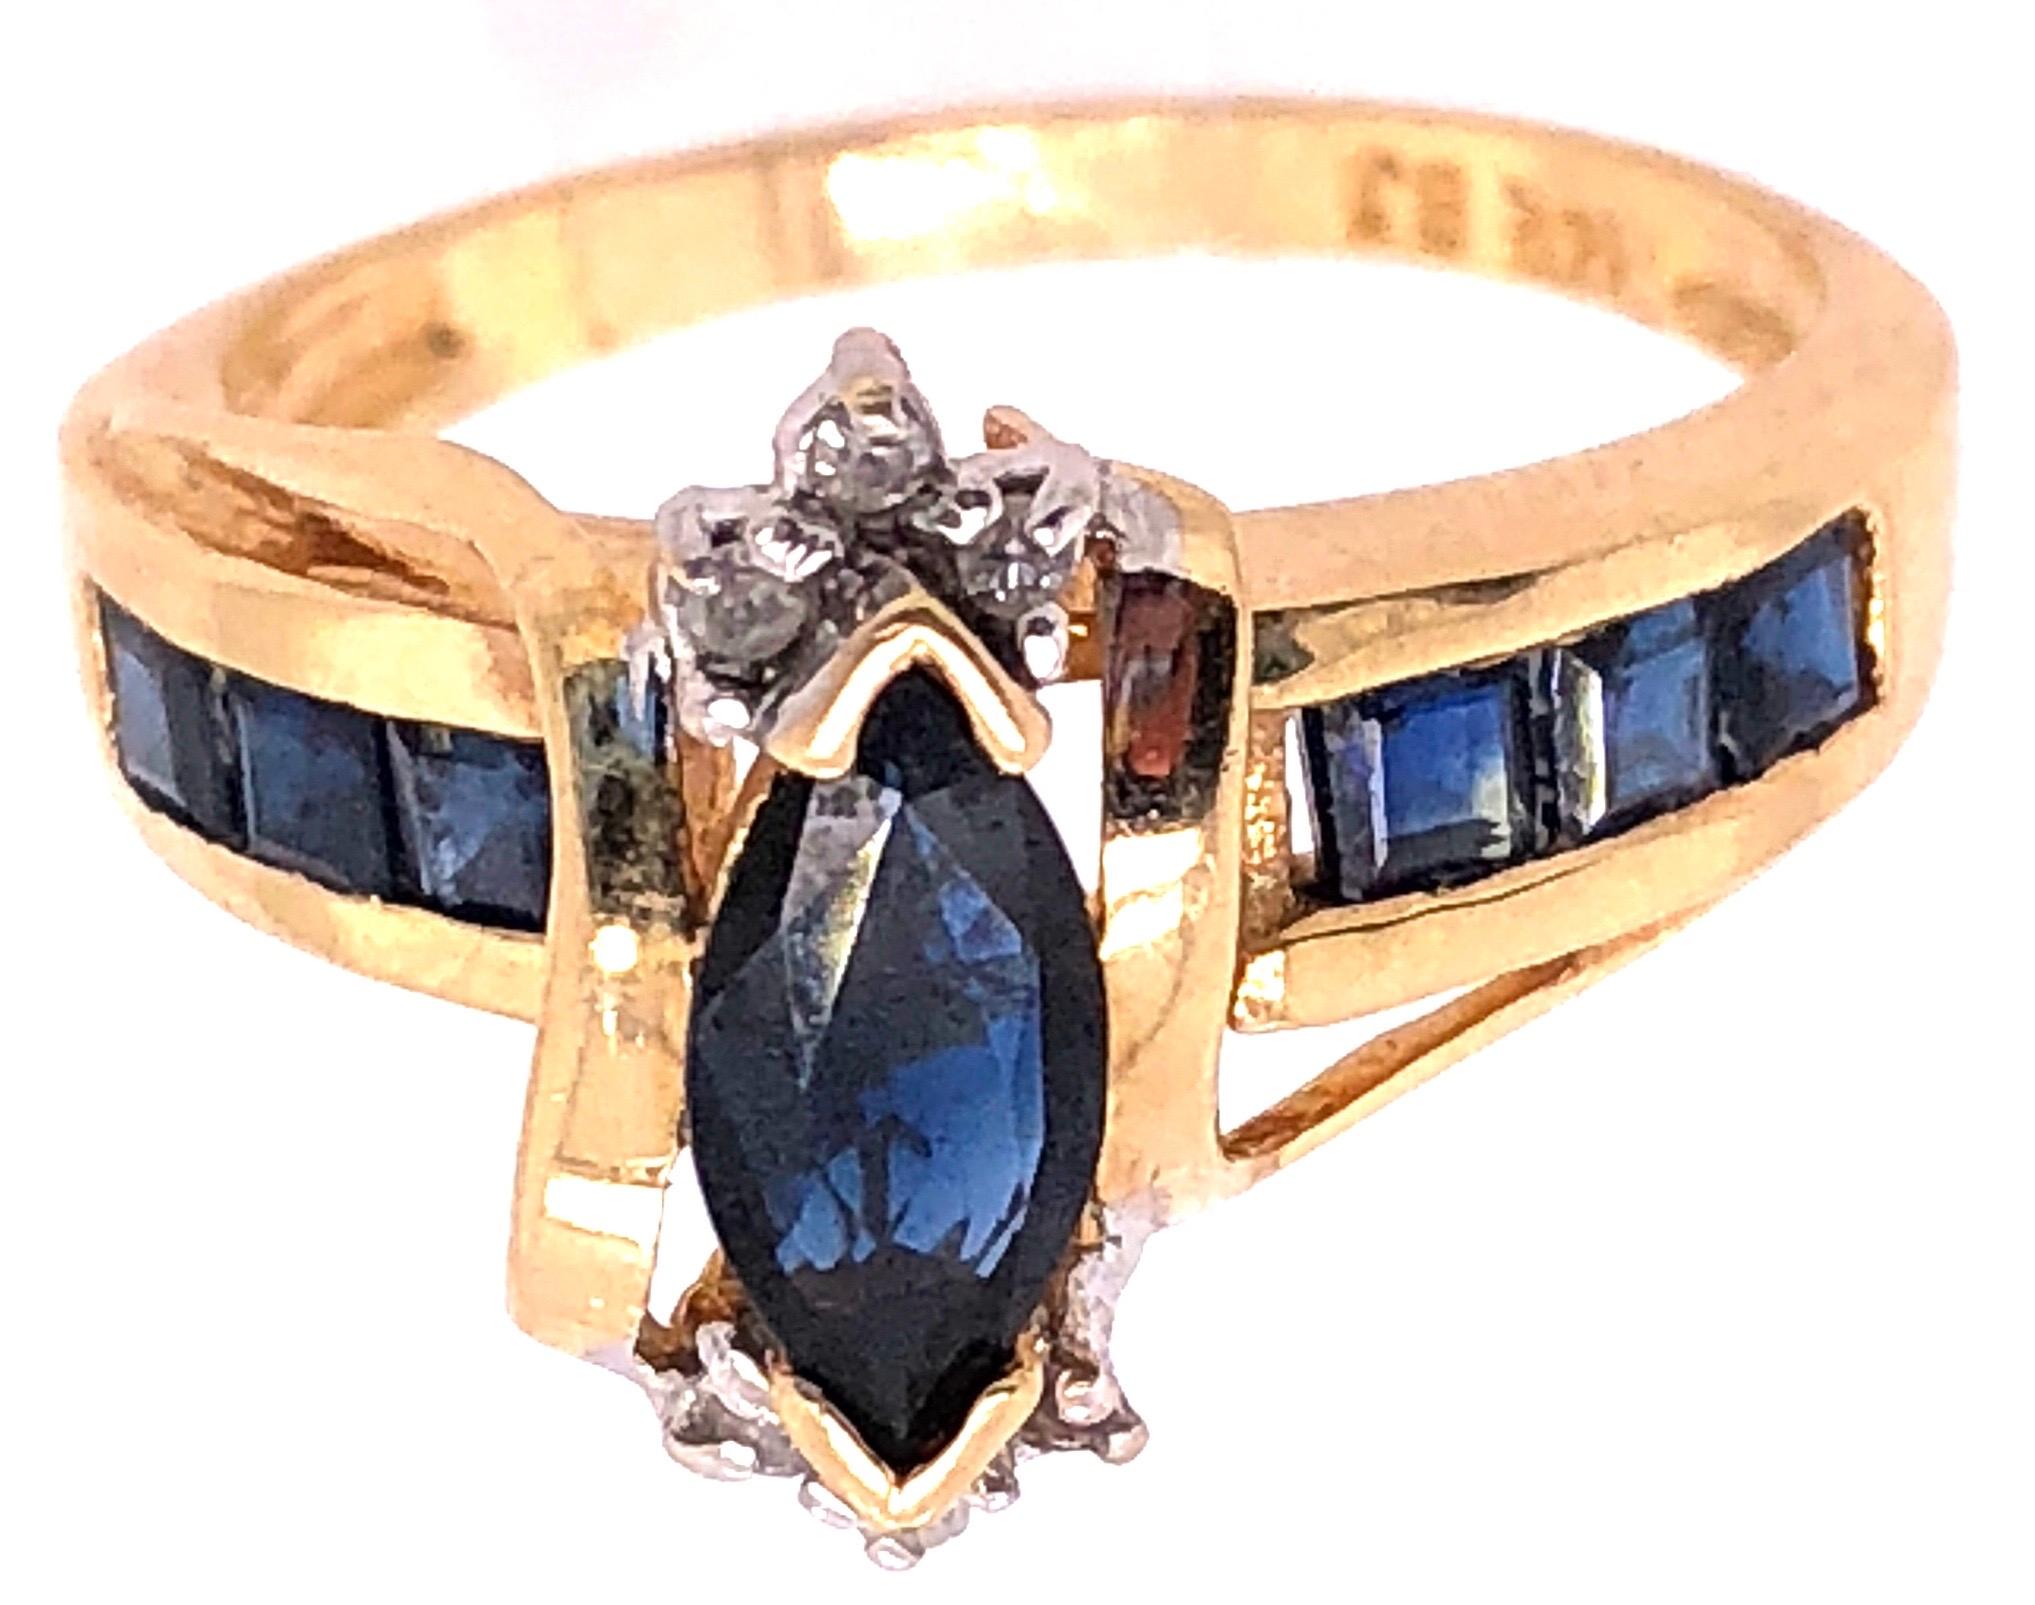 14 Karat Yellow Gold Sapphire Ring With Diamond Accents
Size 6.5
4 grams total weight.